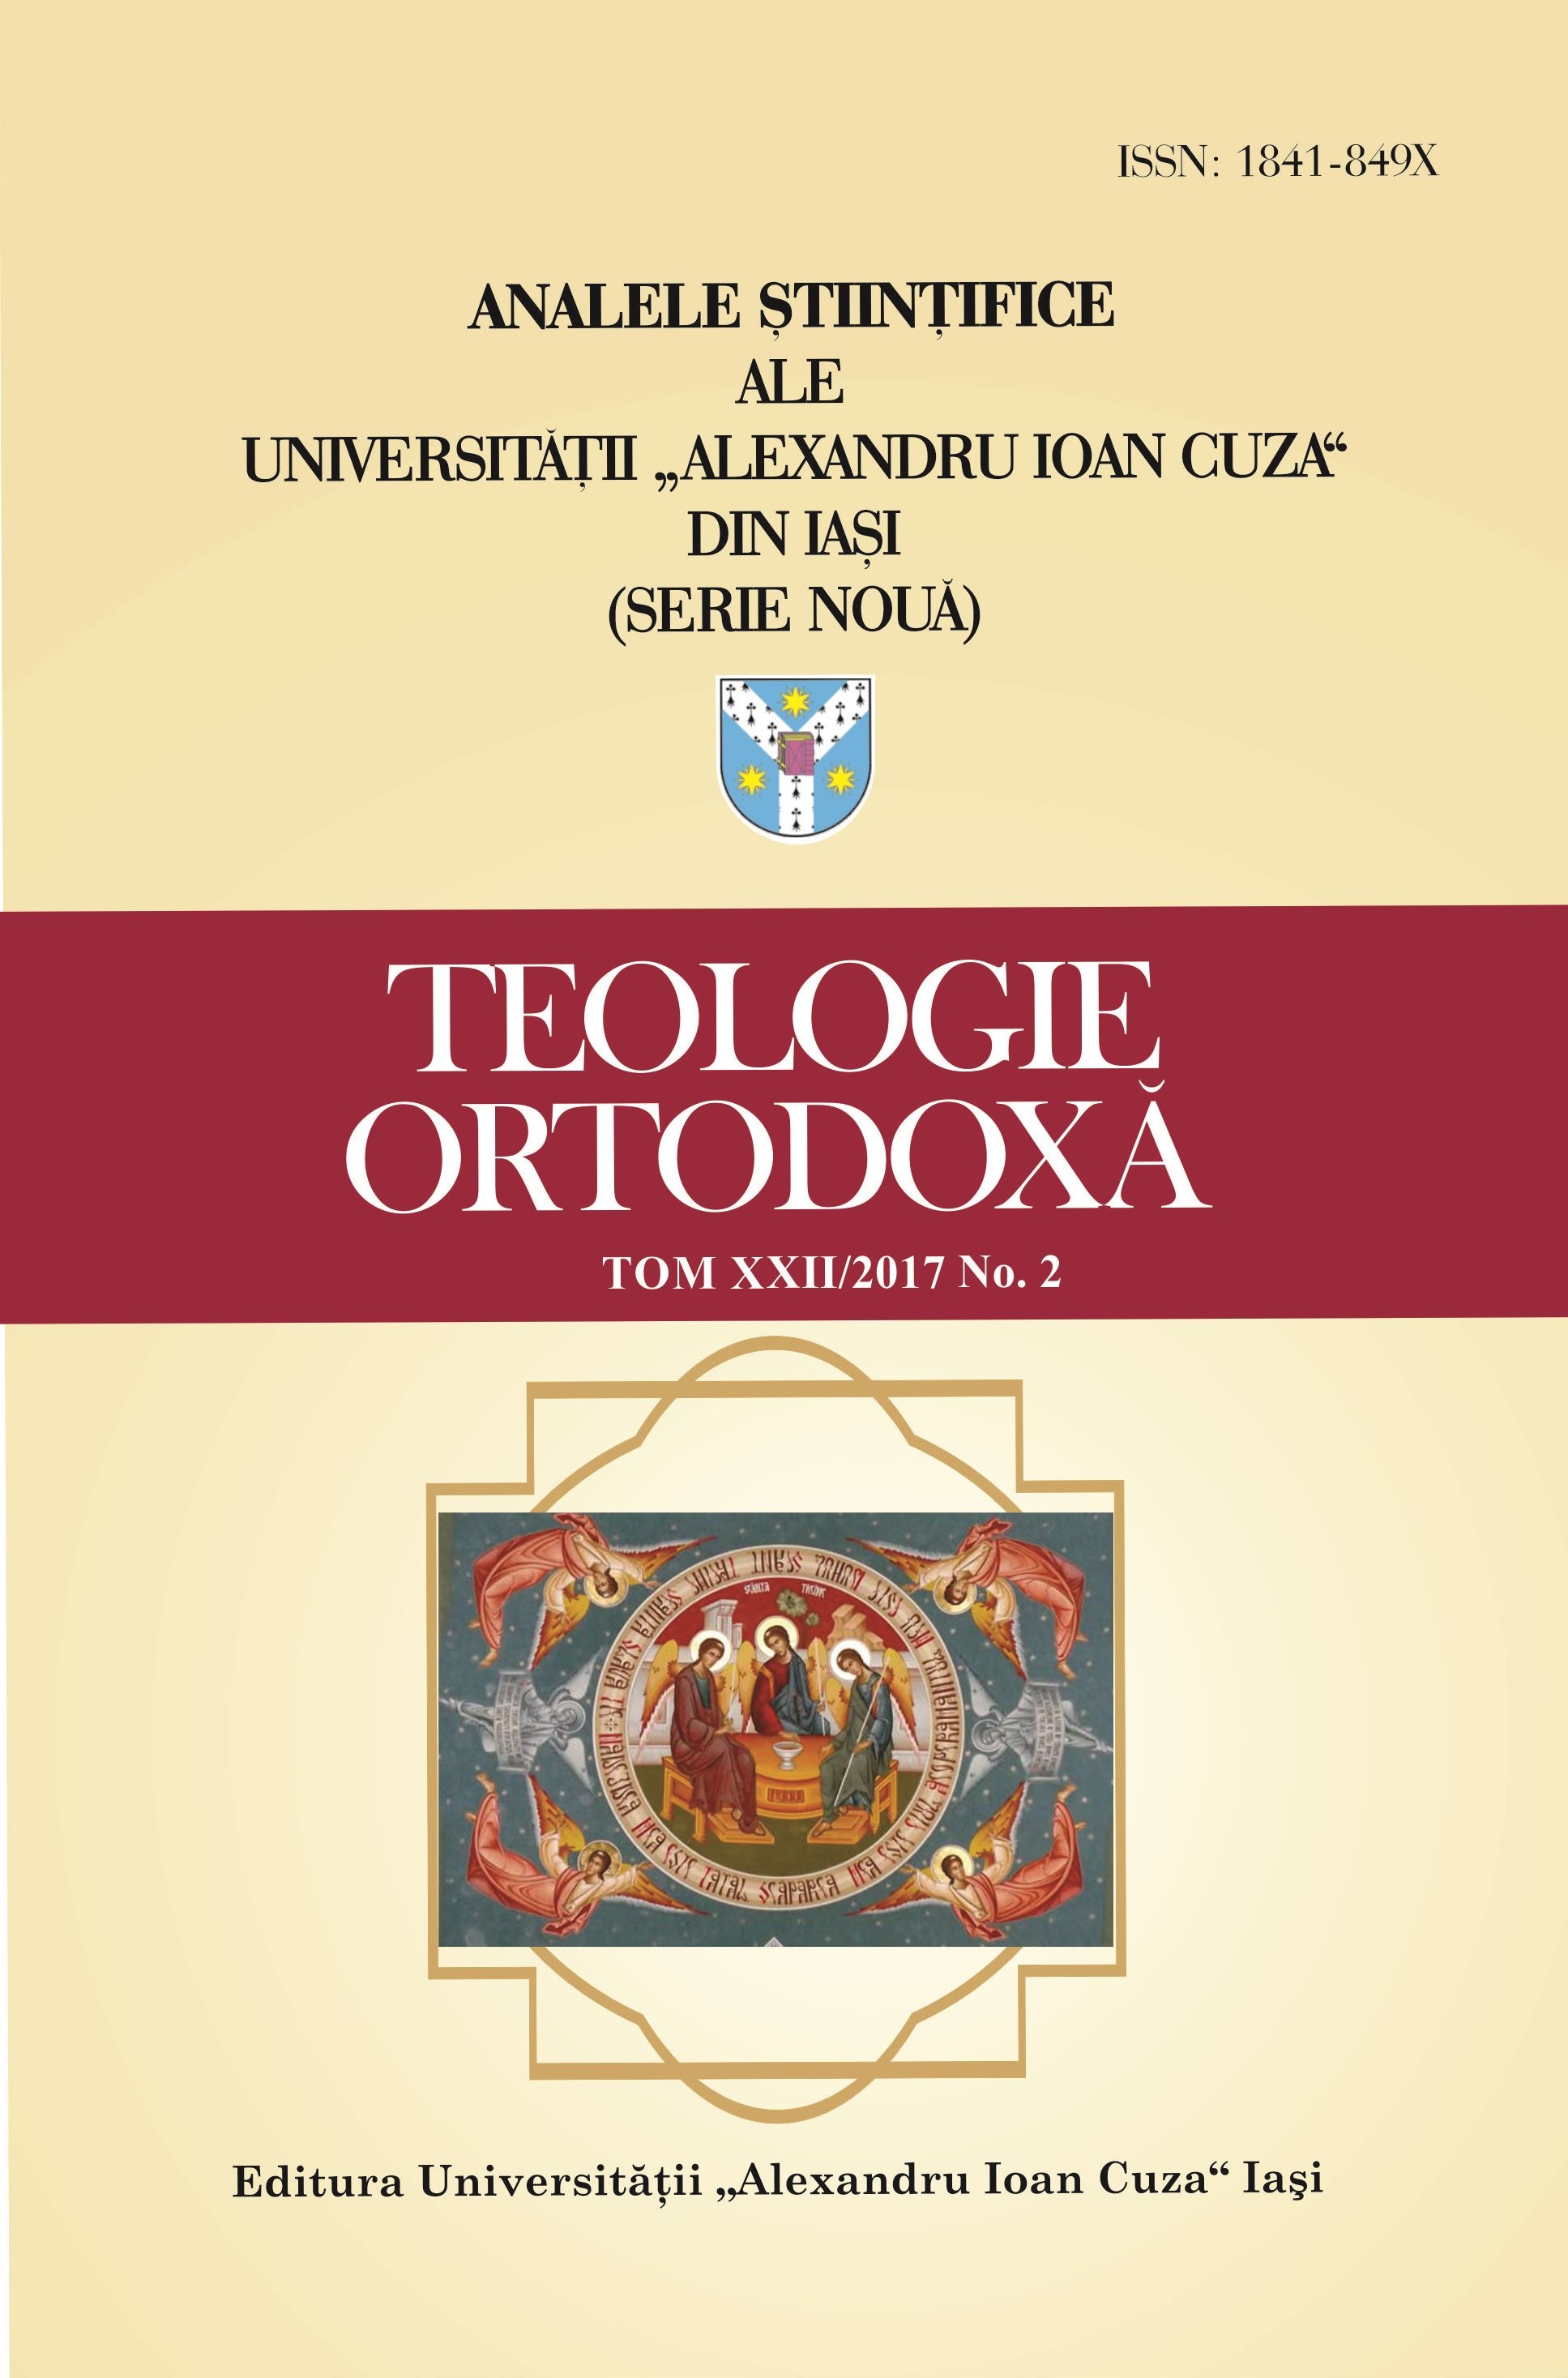 The Cultural Inheritance of Holy Metropolitans Varlaam and Dosoftei. Notes on Metropolitan Veniamin Costachi’s Preface to the 1834 edition of the Liturgical Book Cover Image